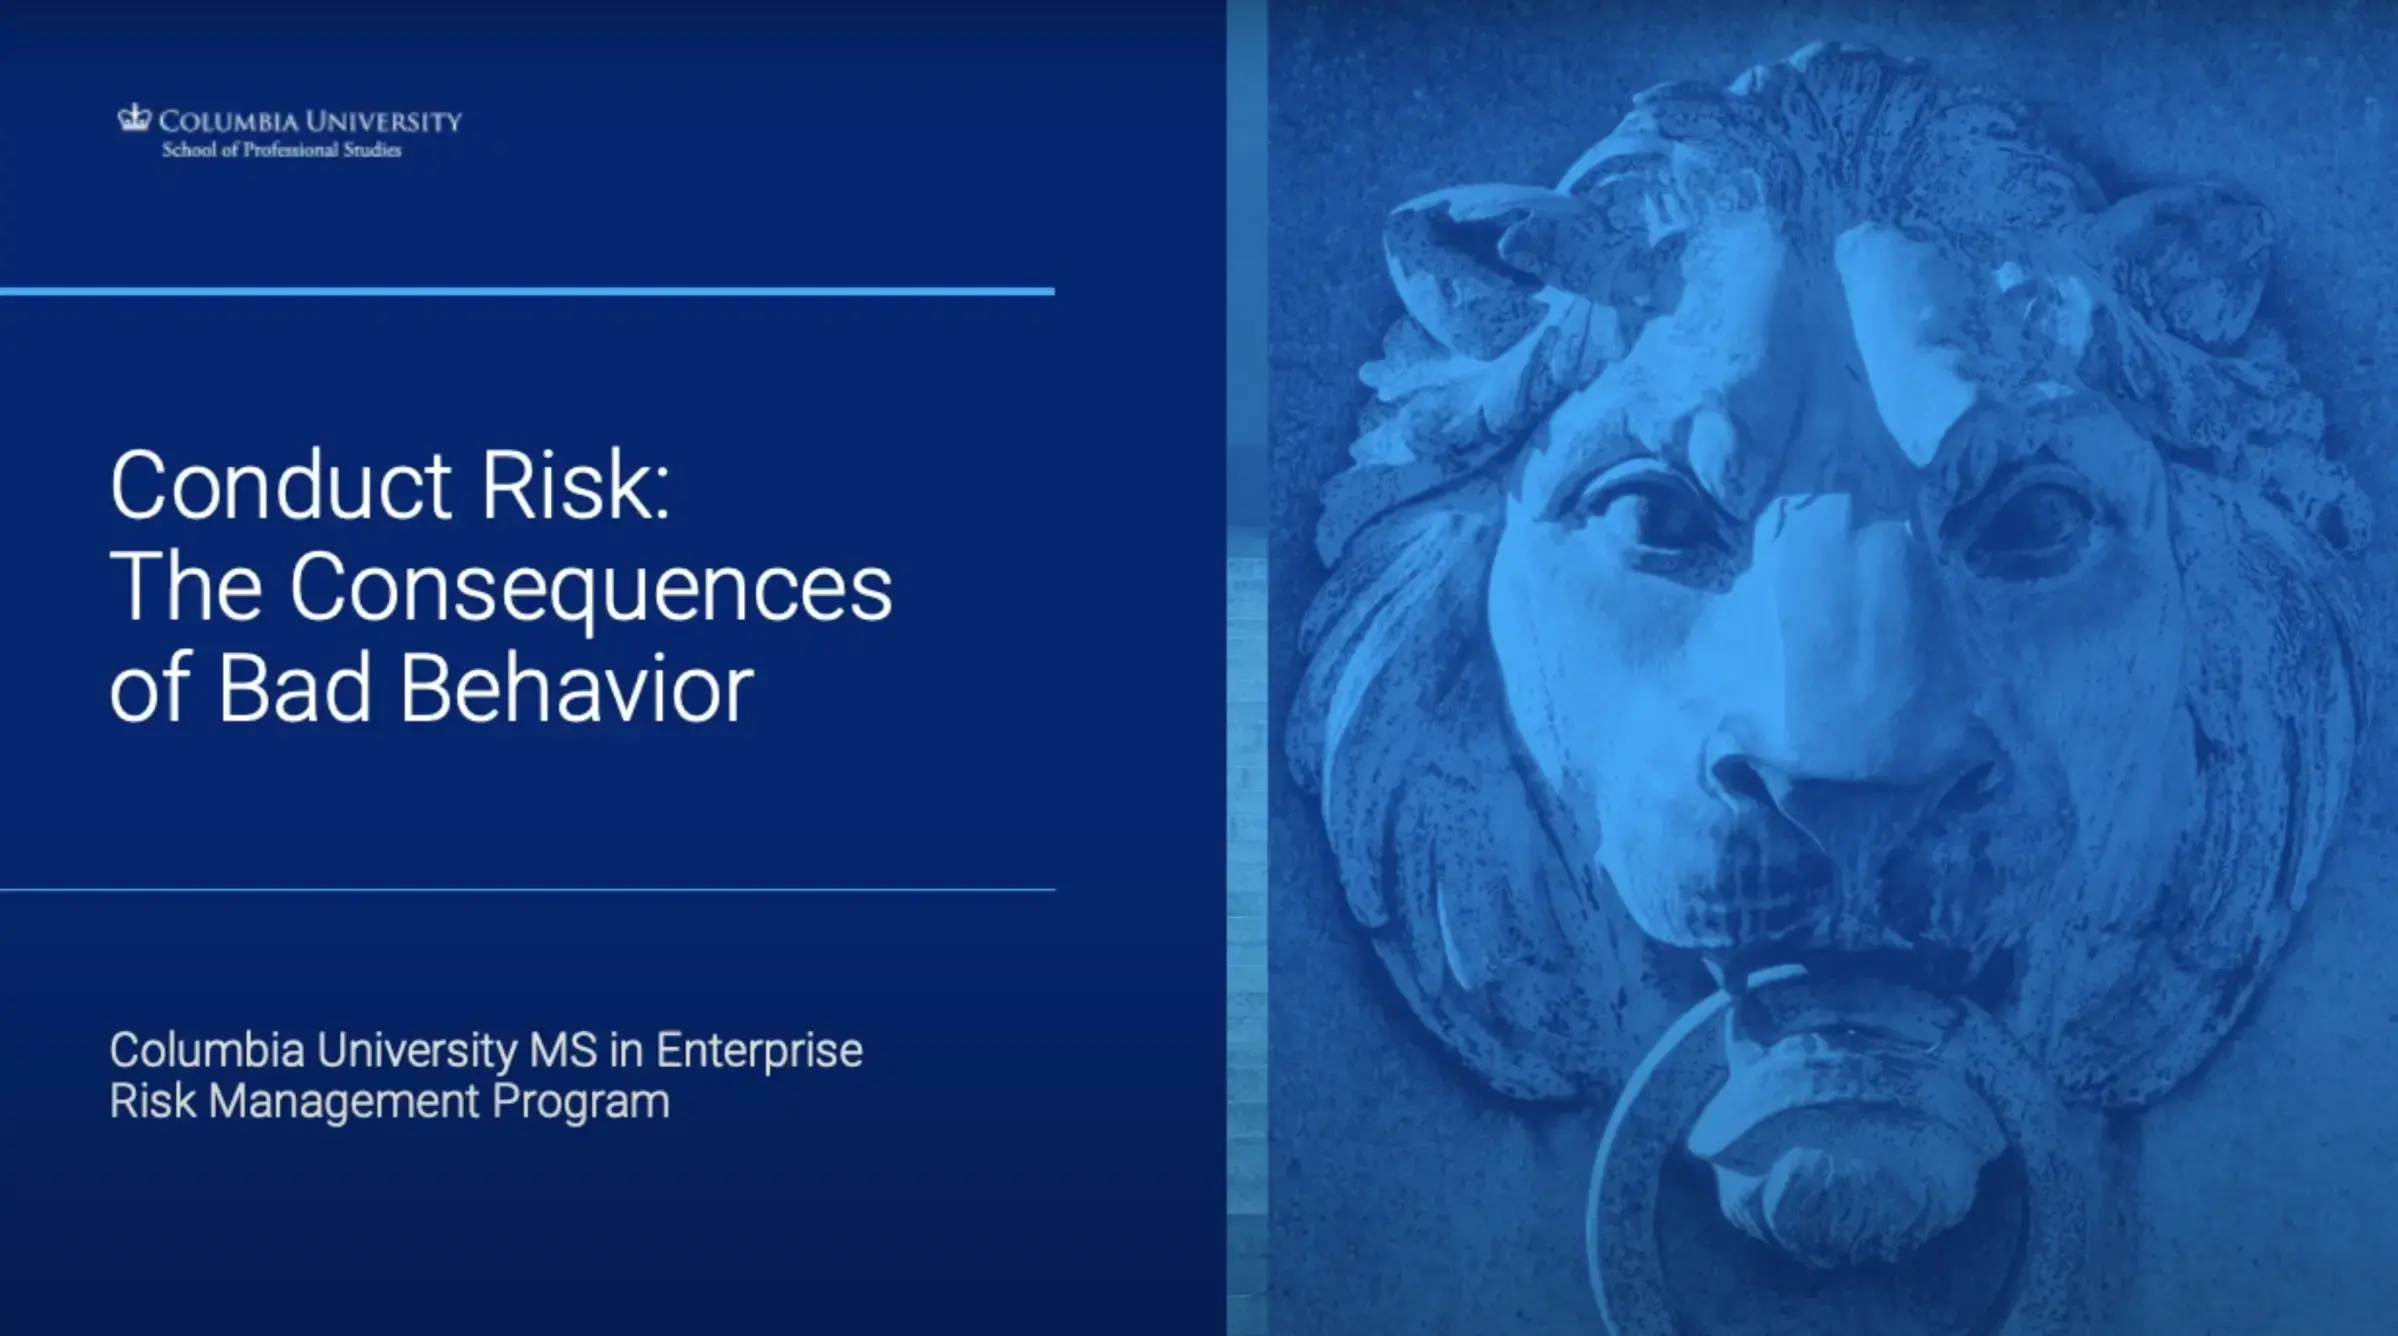 Conduct Risk: The Consequences of Bad Behavior